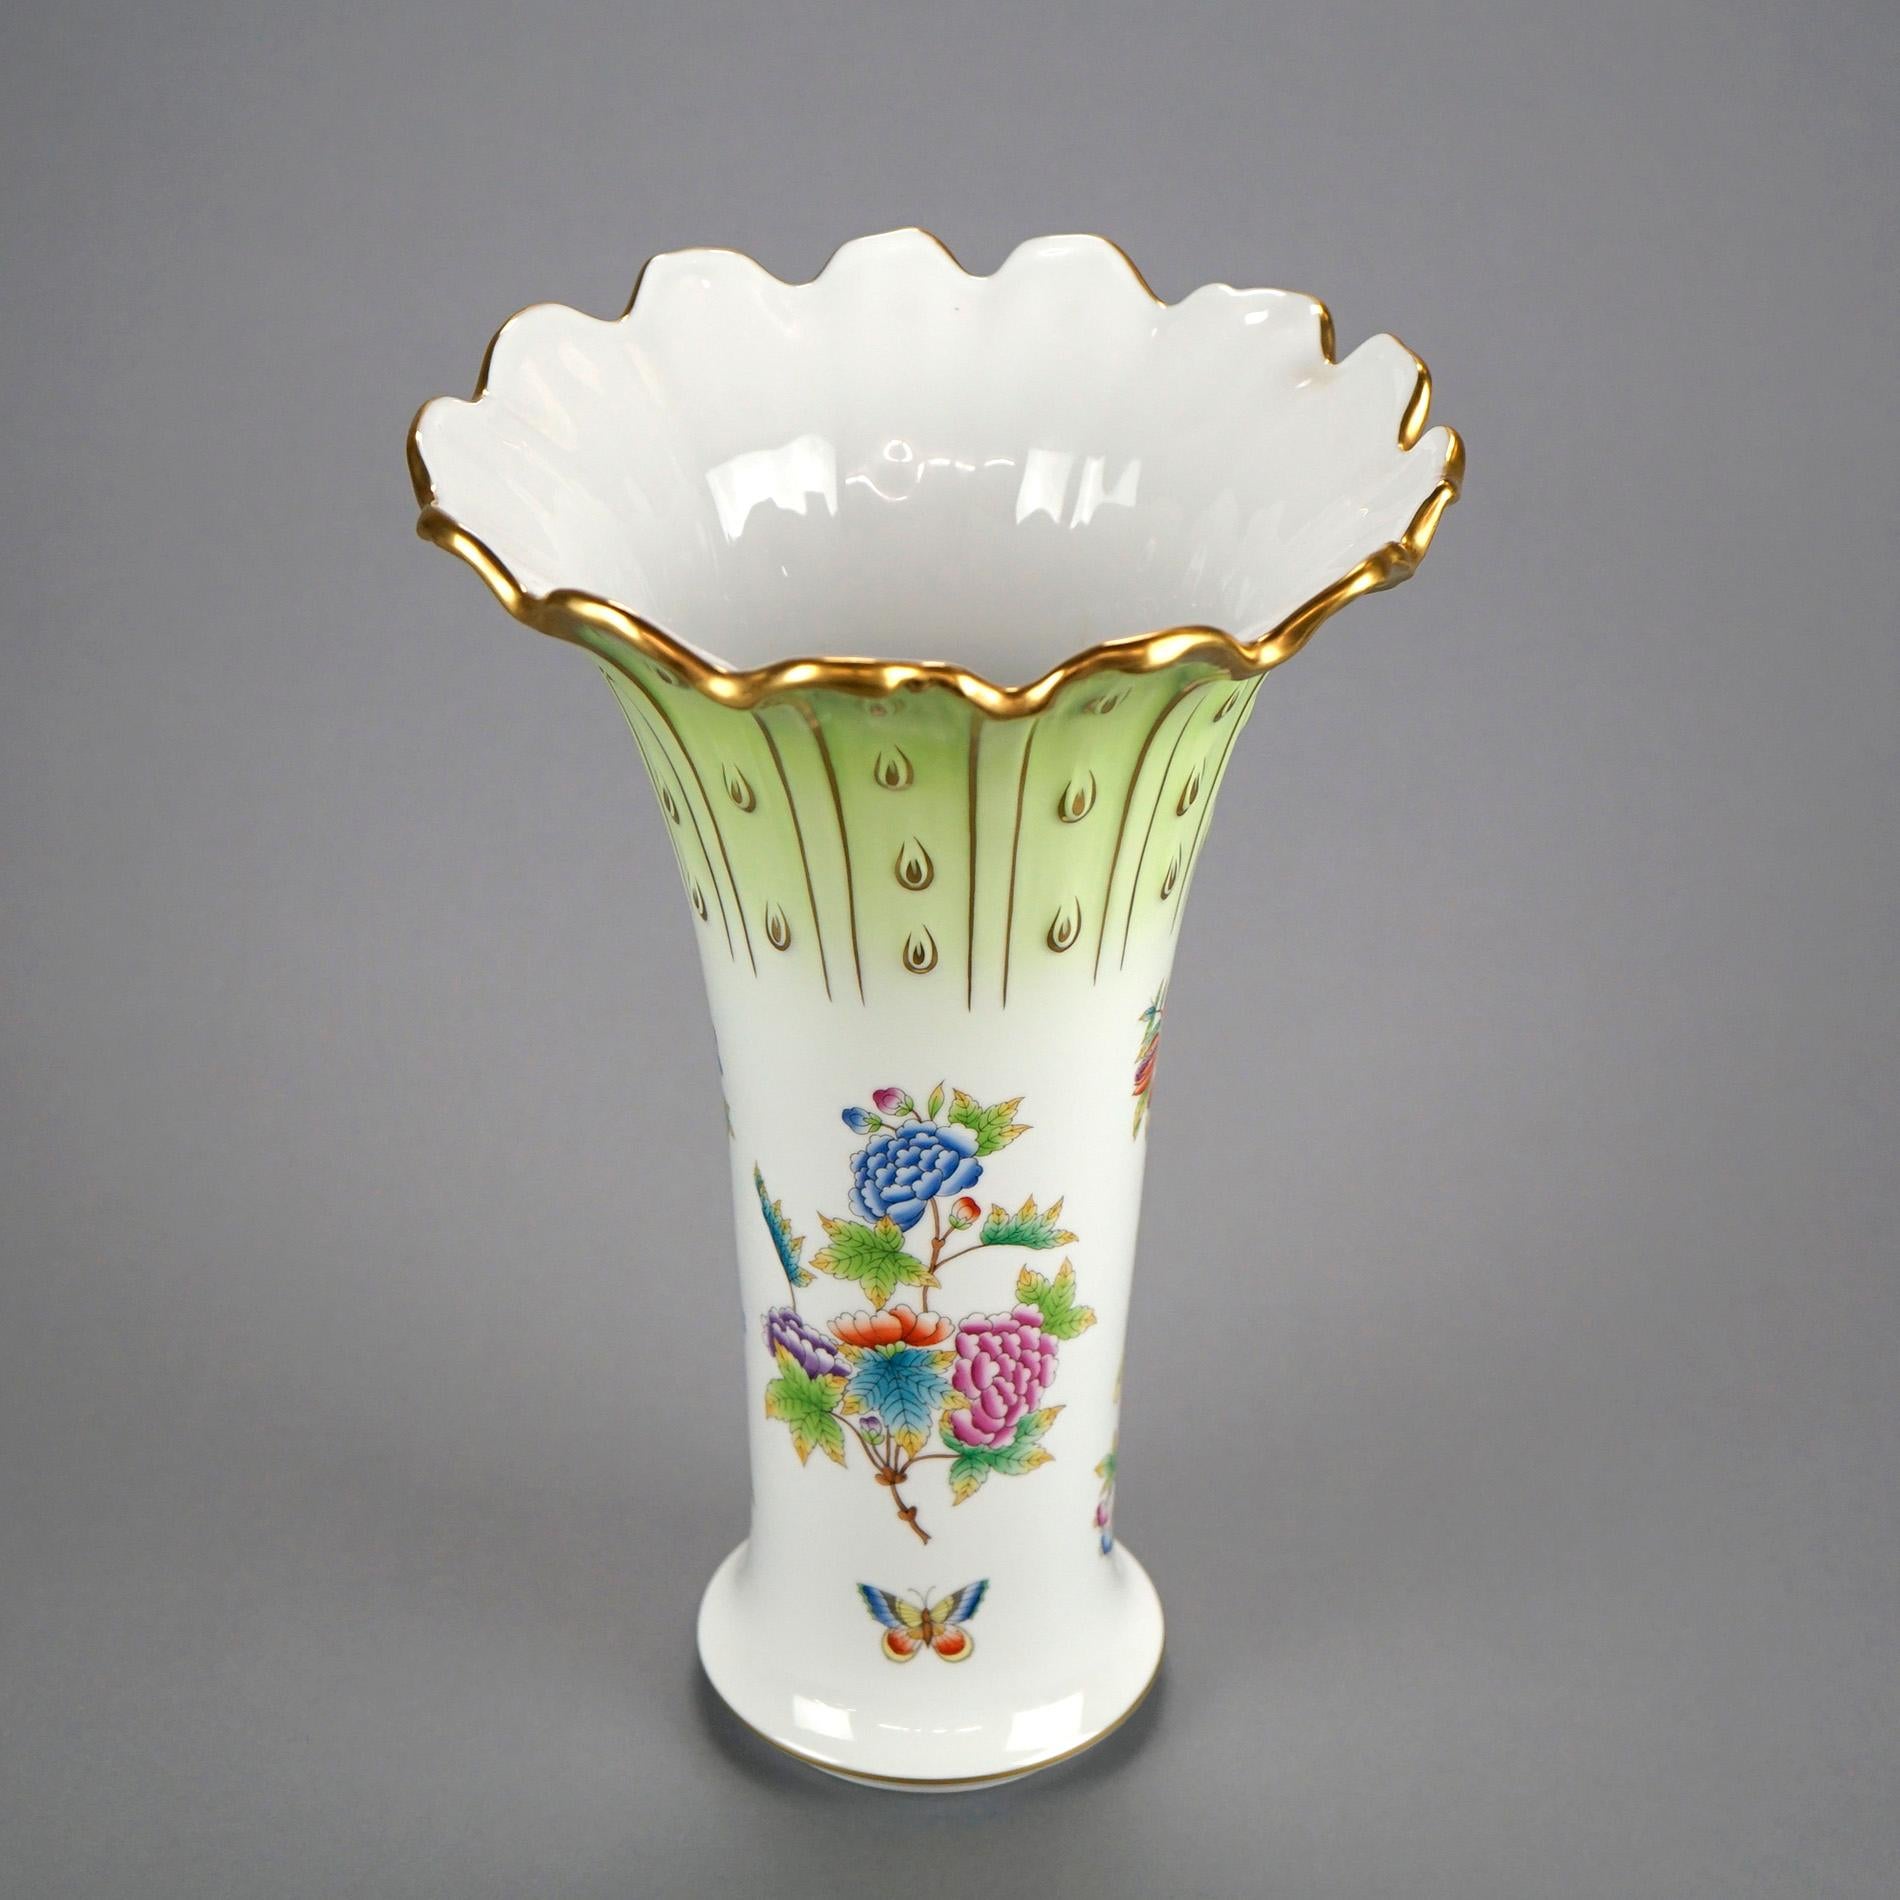 20th Century Large Herend Porcelain Decorated Vase, Flower Garden with Butterflies, 20th C